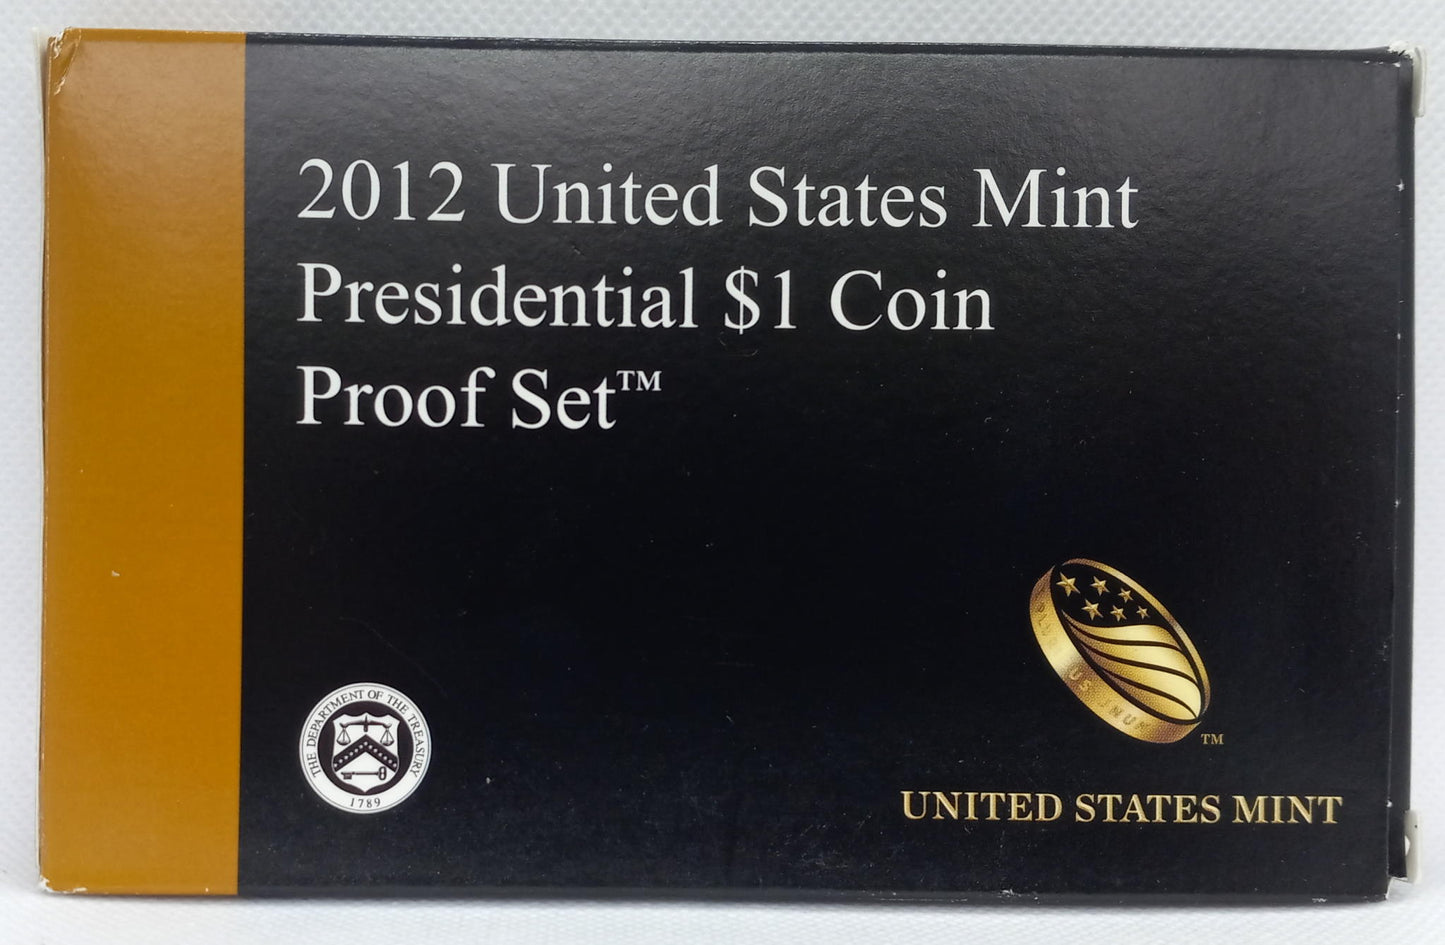 2012 United States Mint PRESIDENTIAL DOLLAR COIN PROOF SET With OGP & COA!